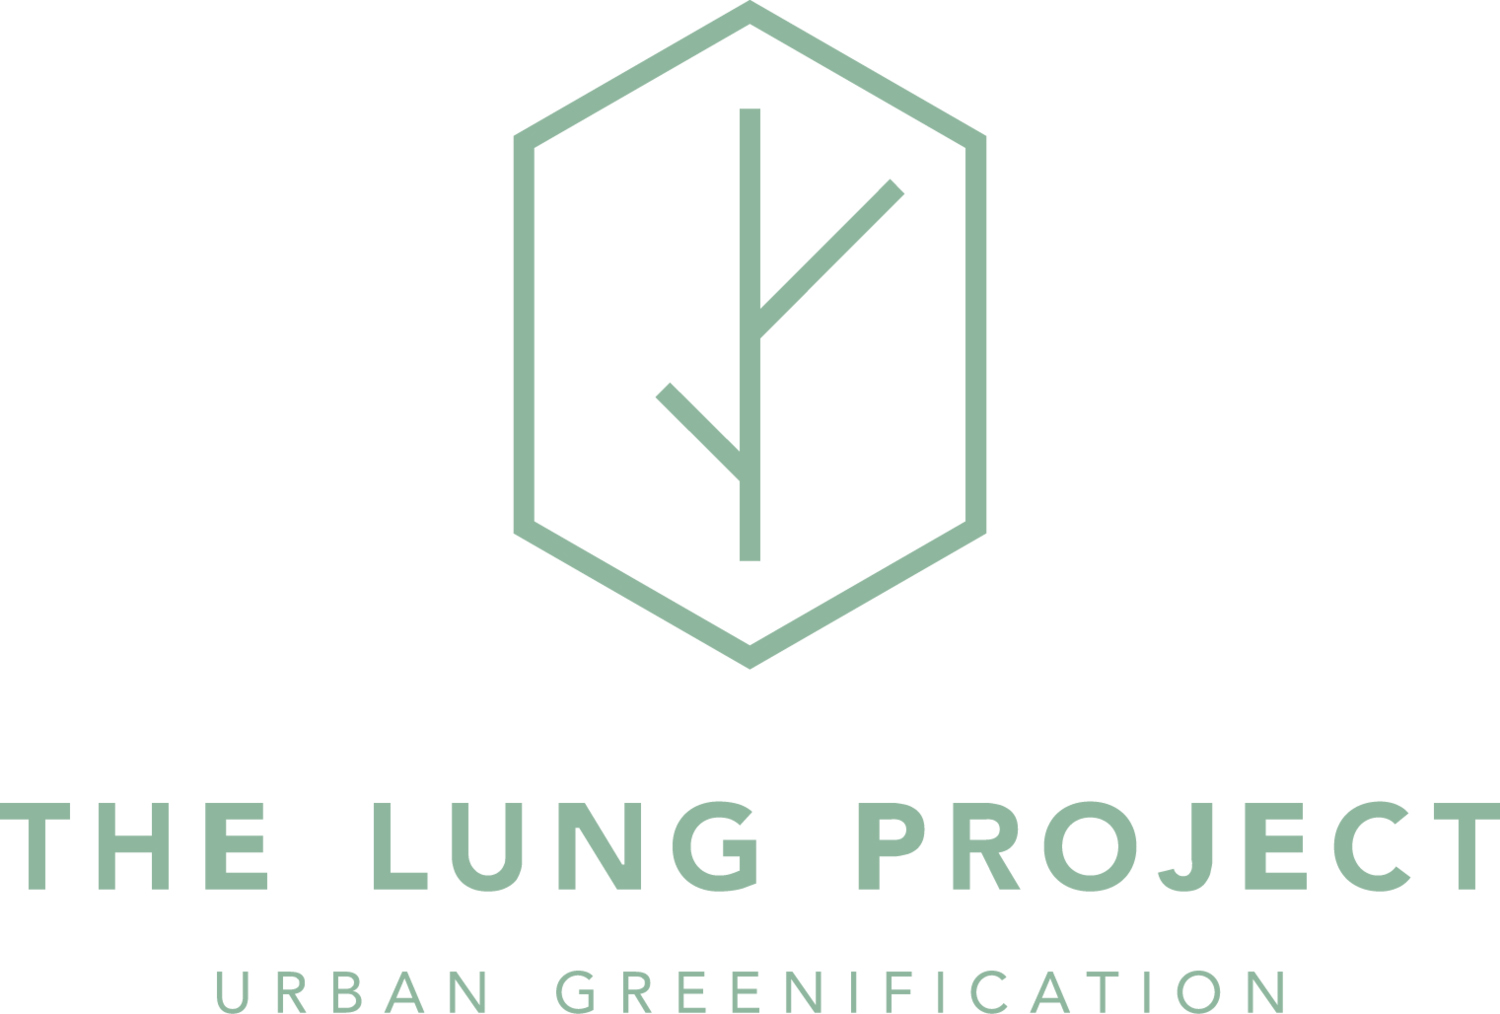 The Lung Project